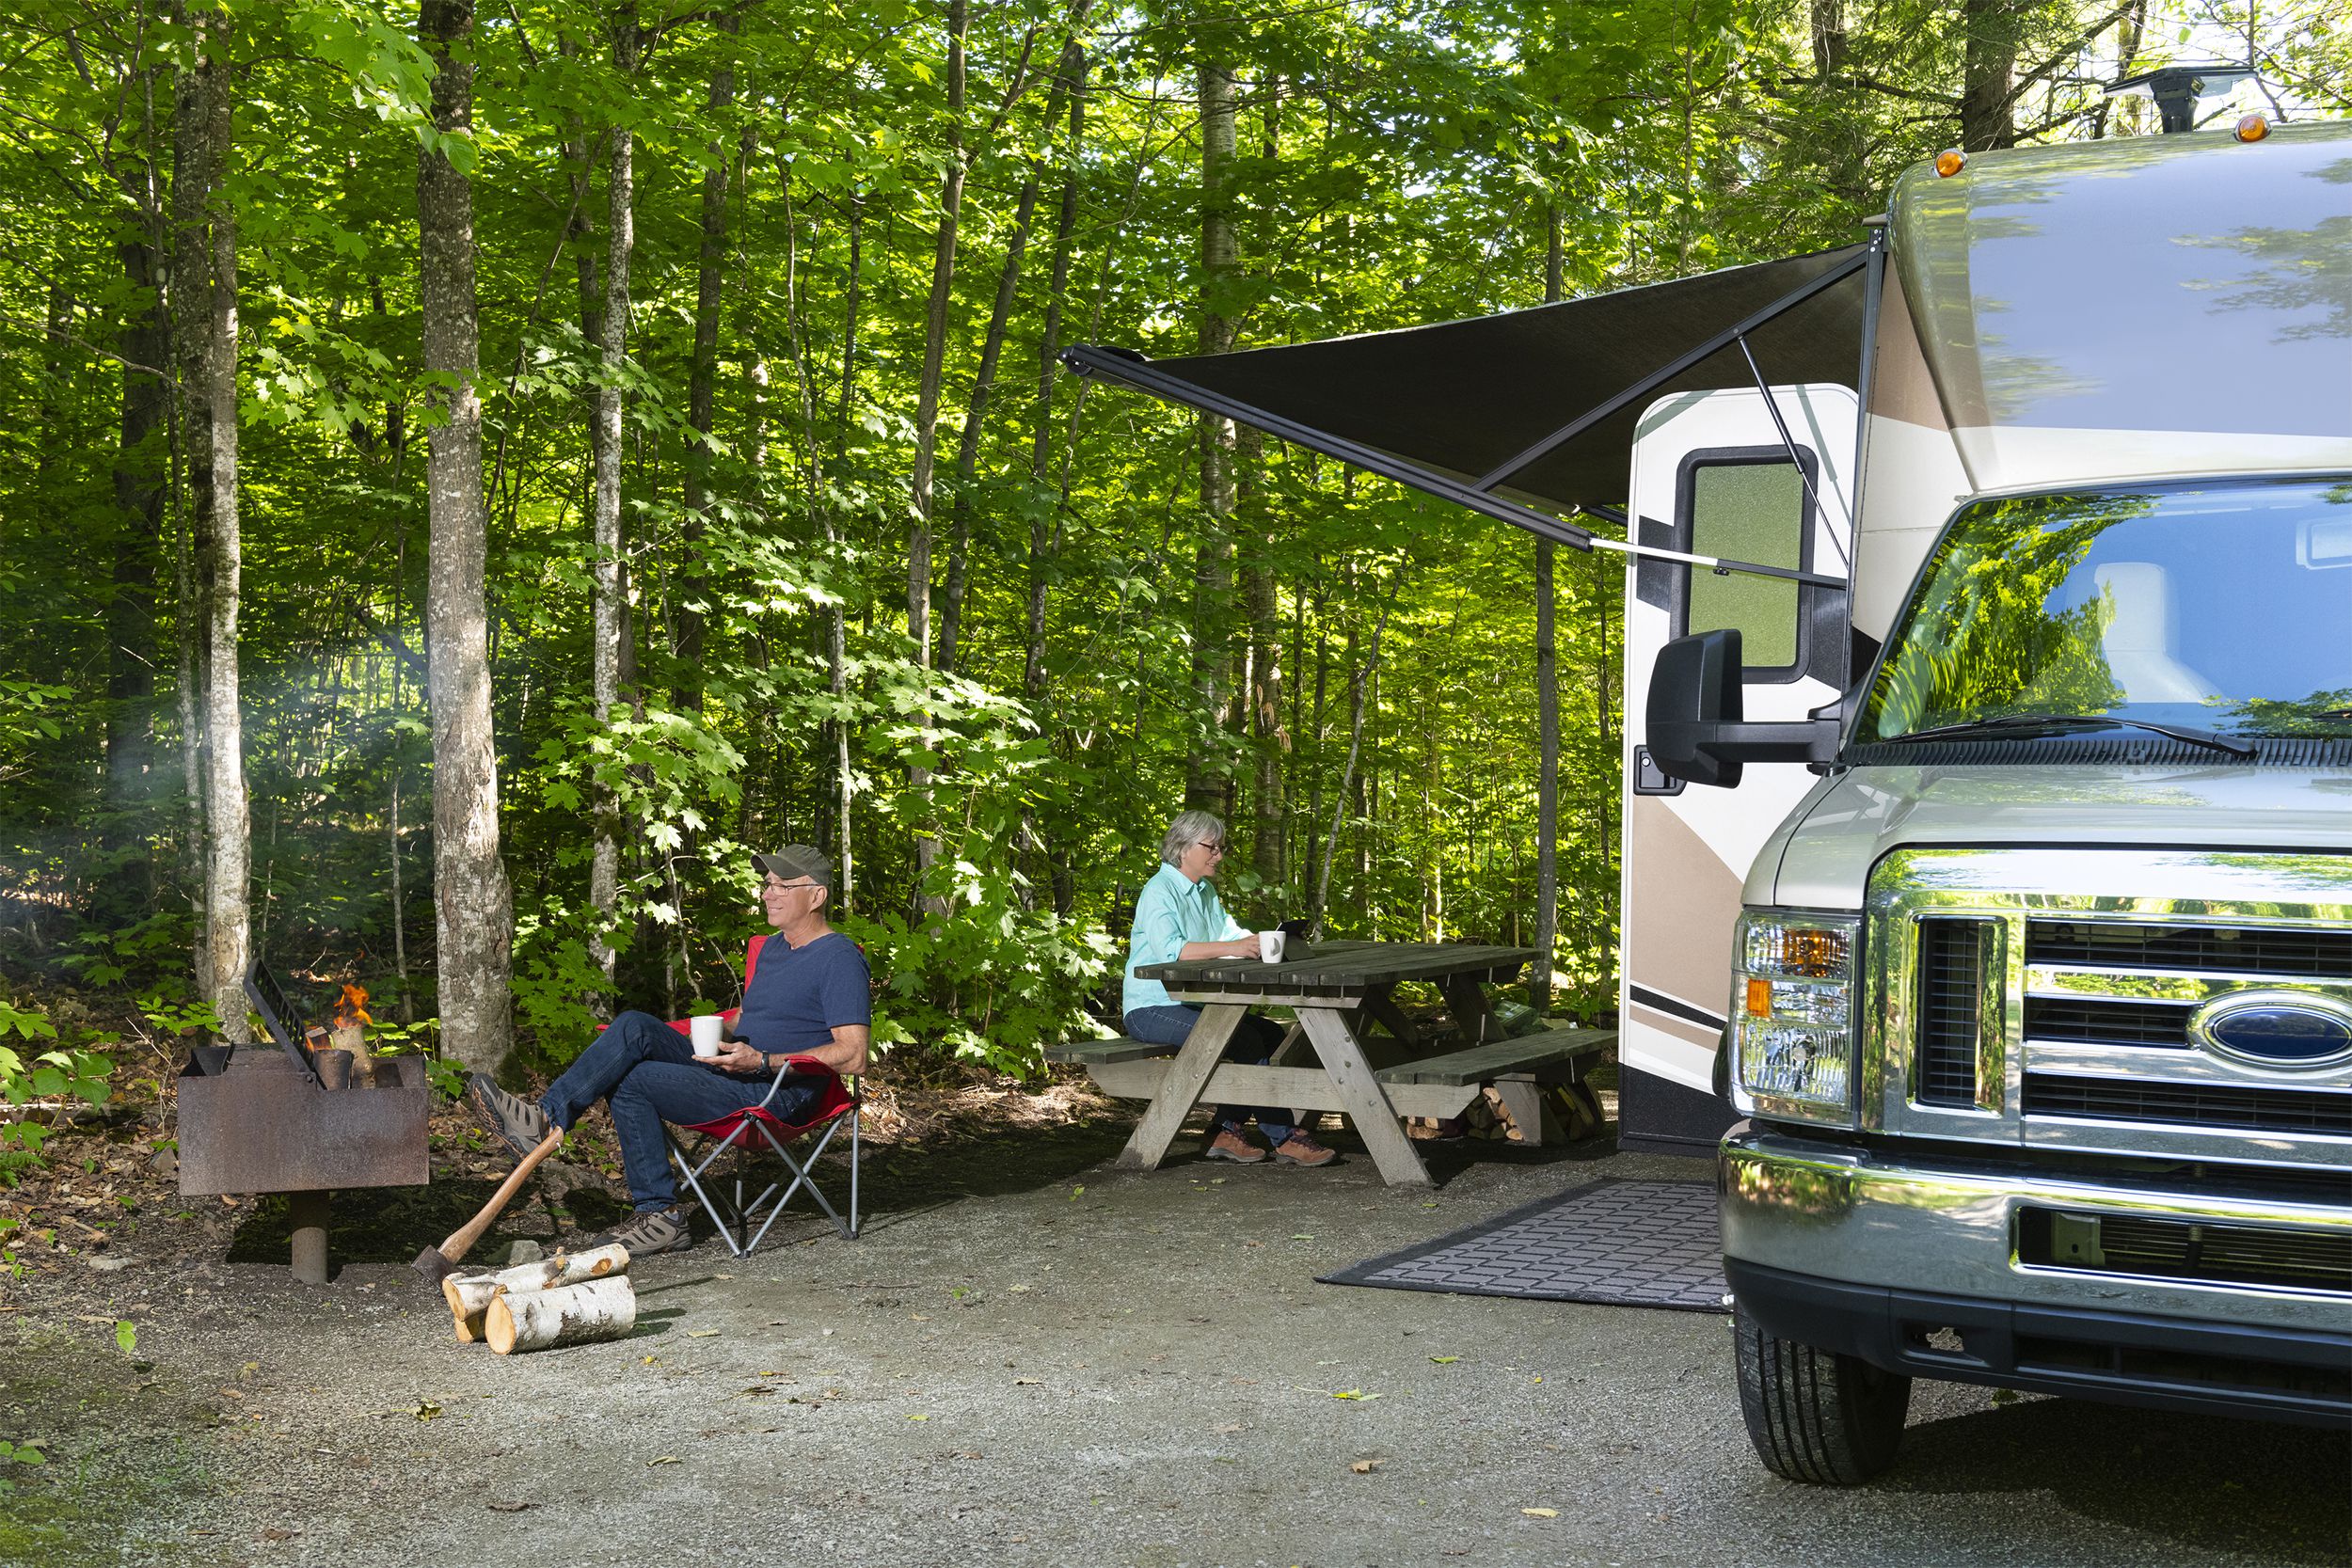 <p>RV travelers should never have trouble finding a place to spend the night. According to a <a href="https://www.thewanderingrv.com/rv-industry-statistics-trends-facts/">Wandering RV report</a>, there are about 16,000 campgrounds and parking facilities (public and private) that allow <a href="https://blog.cheapism.com/cheap-rv-vacations/">RV camping throughout the country</a>.  </p>